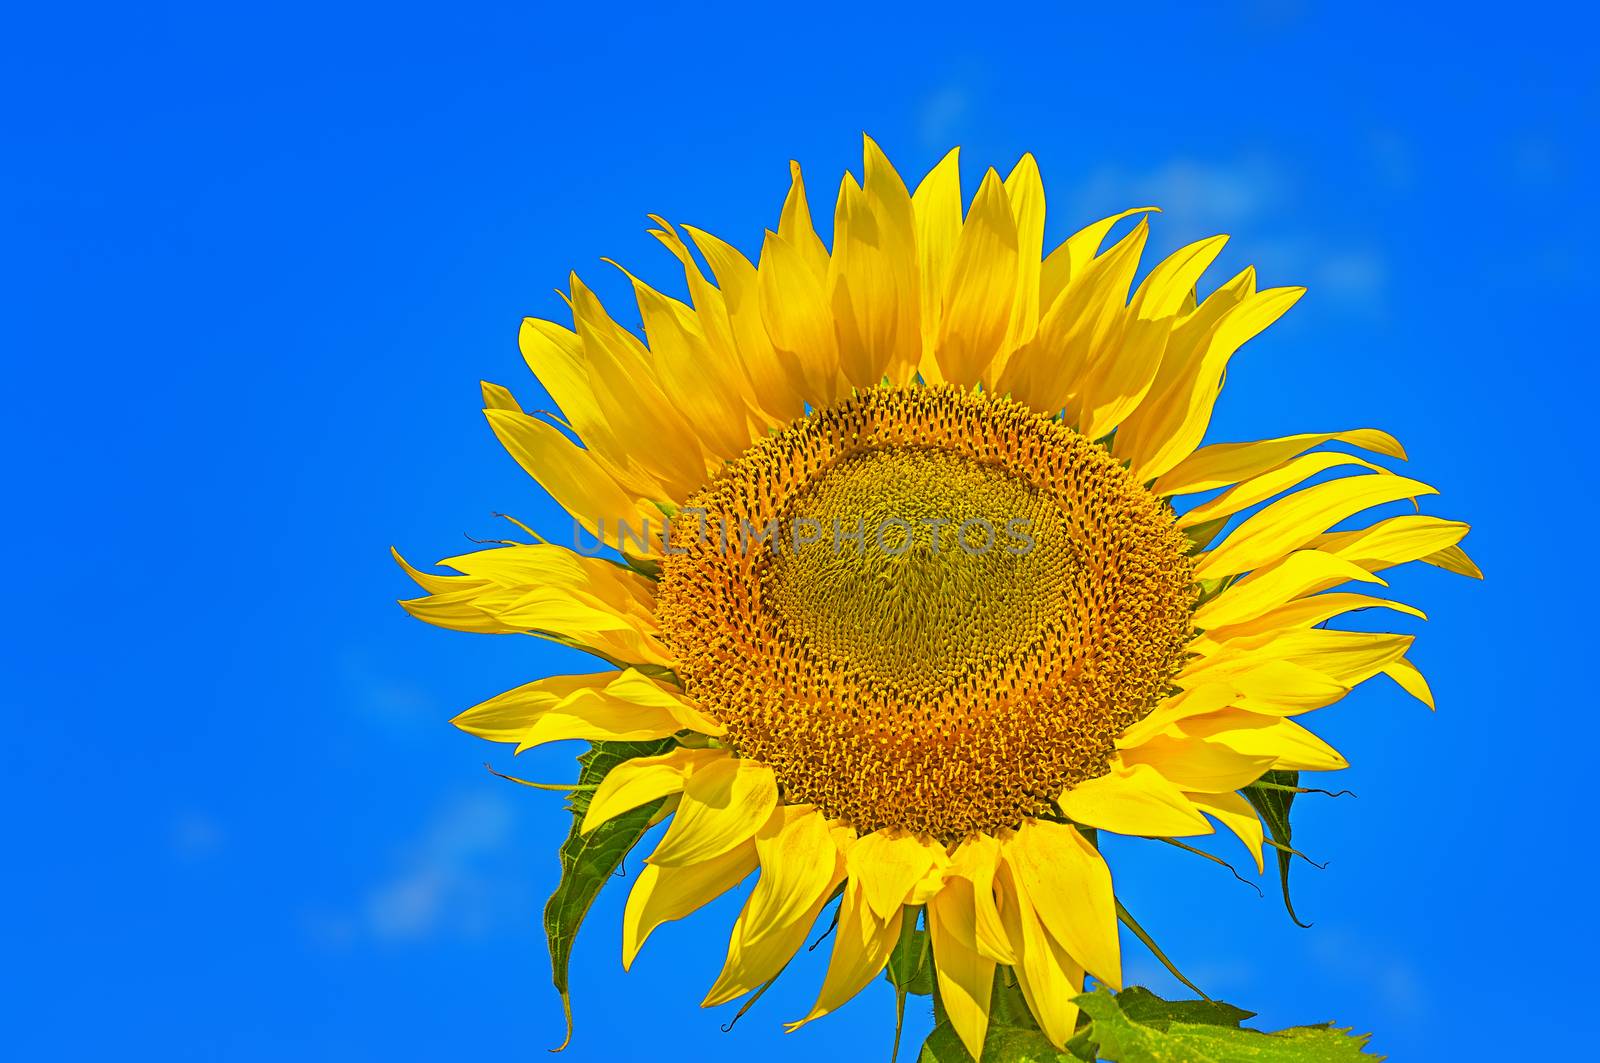 Closeup of flower sunflower on background of blue sky with clouds